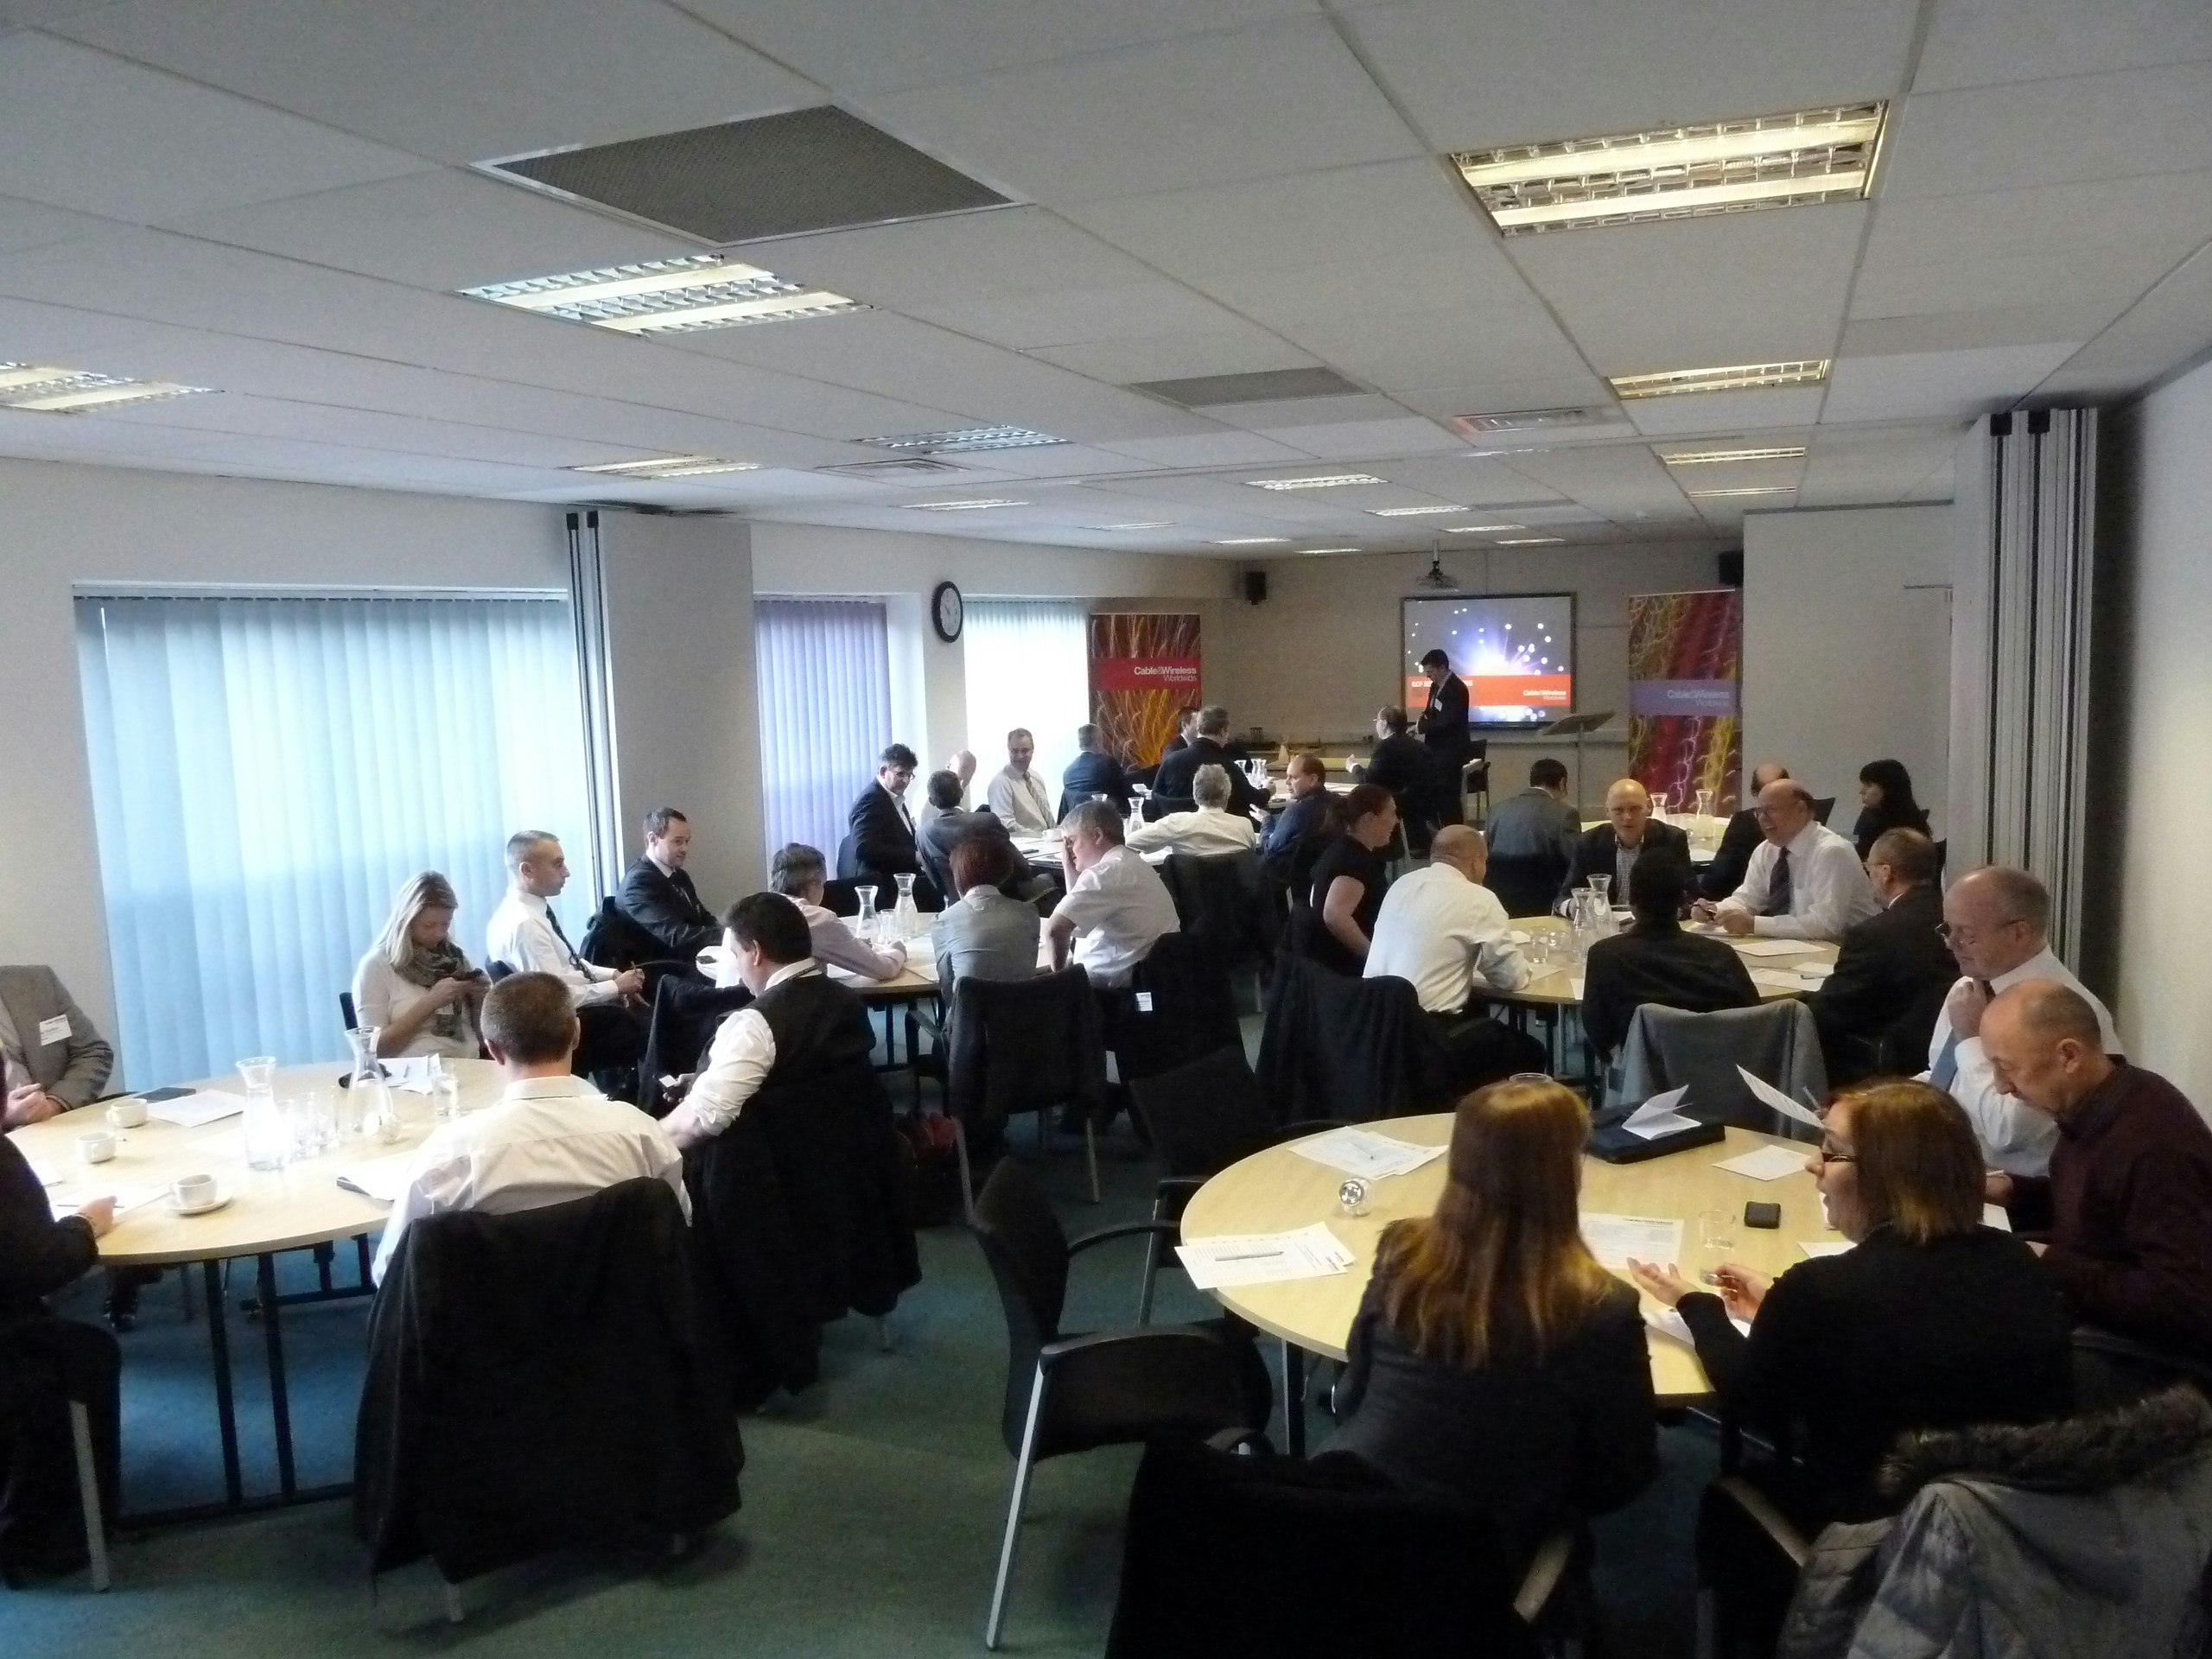 Conference Venues in Liverpool - Liverpool Gateway Conference Centre